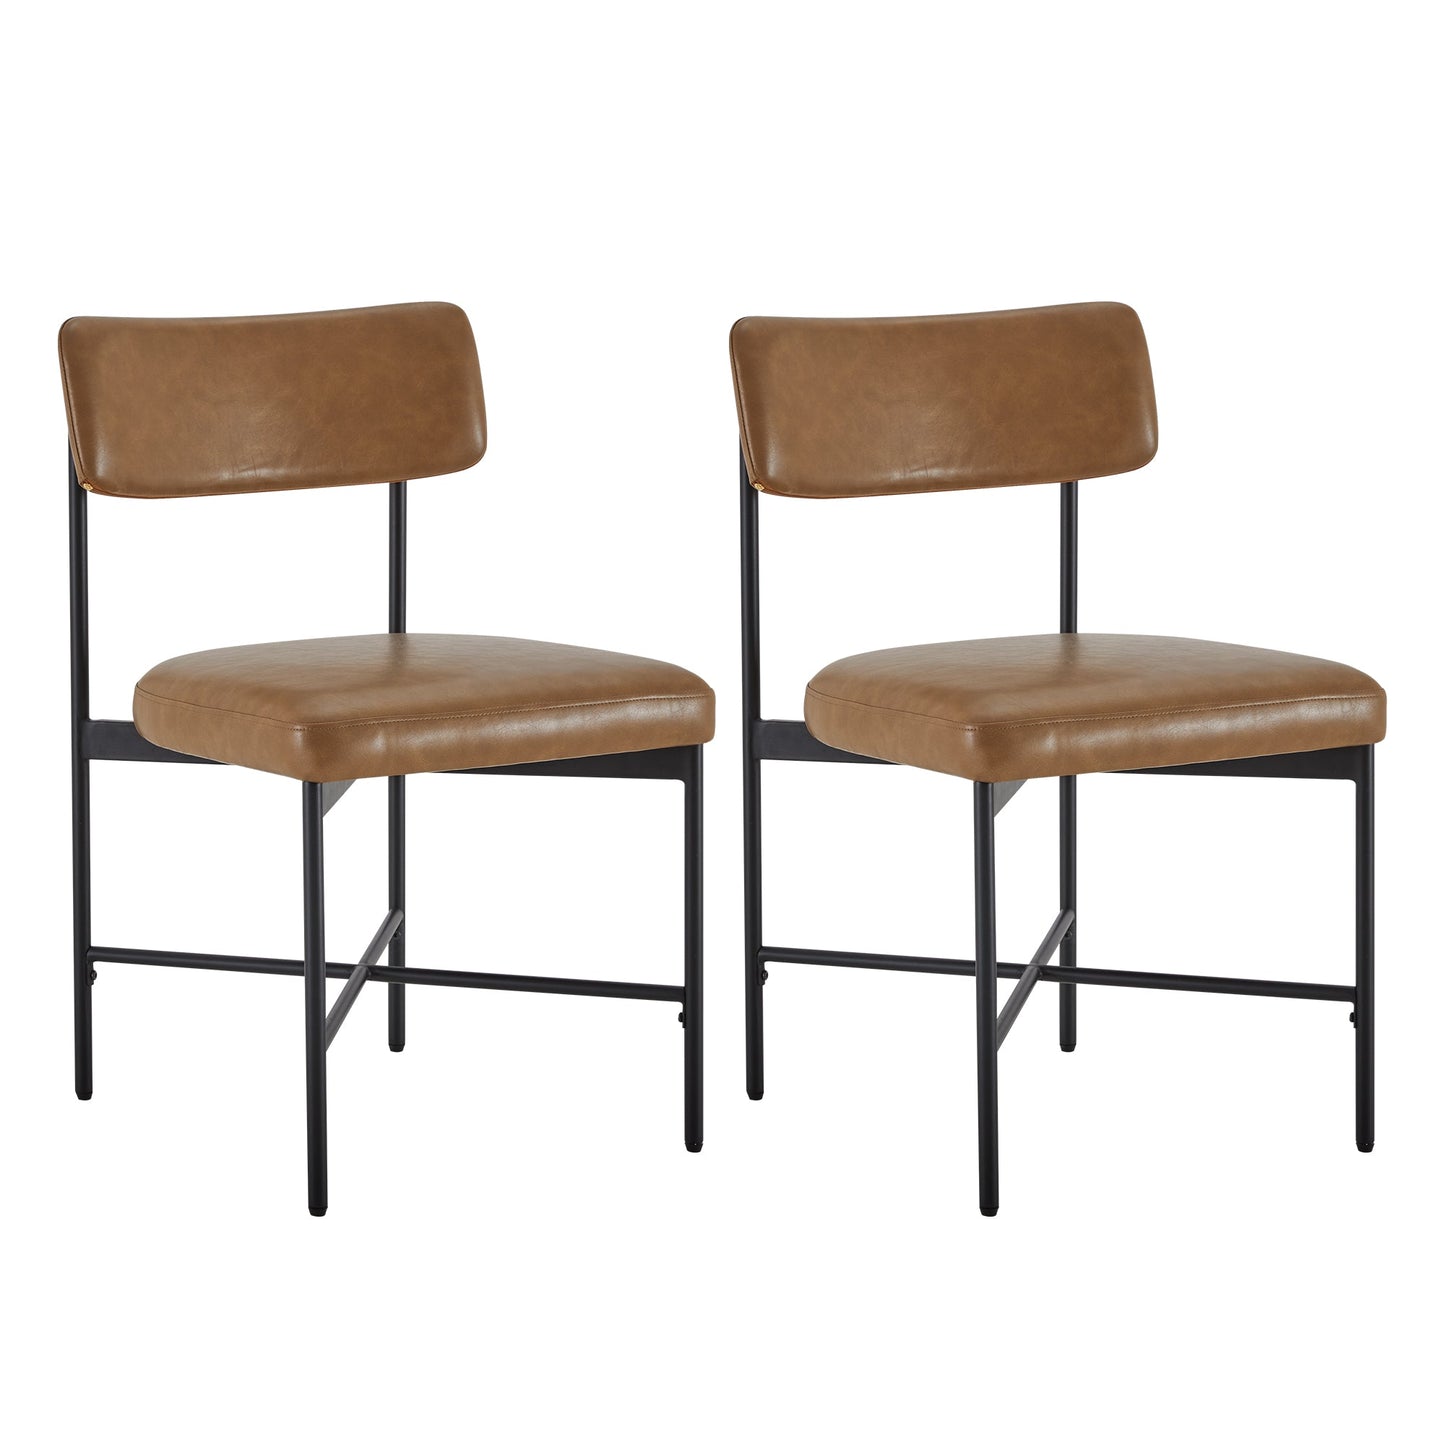 CHITA LIVING-Lovy Dining Chair (Set of 2)-Dining Chairs-Faux Leather-Saddle Brown-